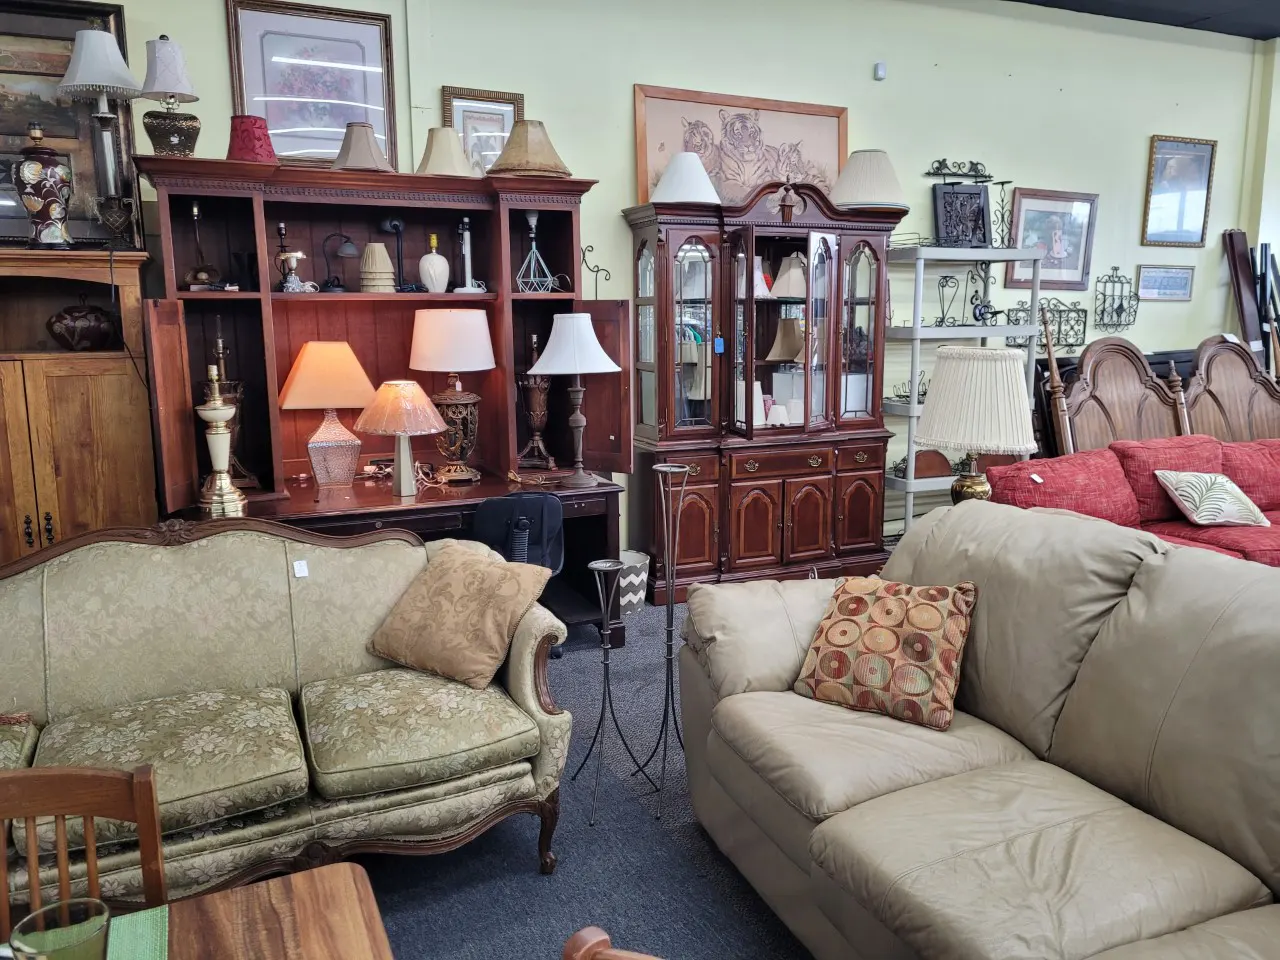 Couches and furniture inside thrift store